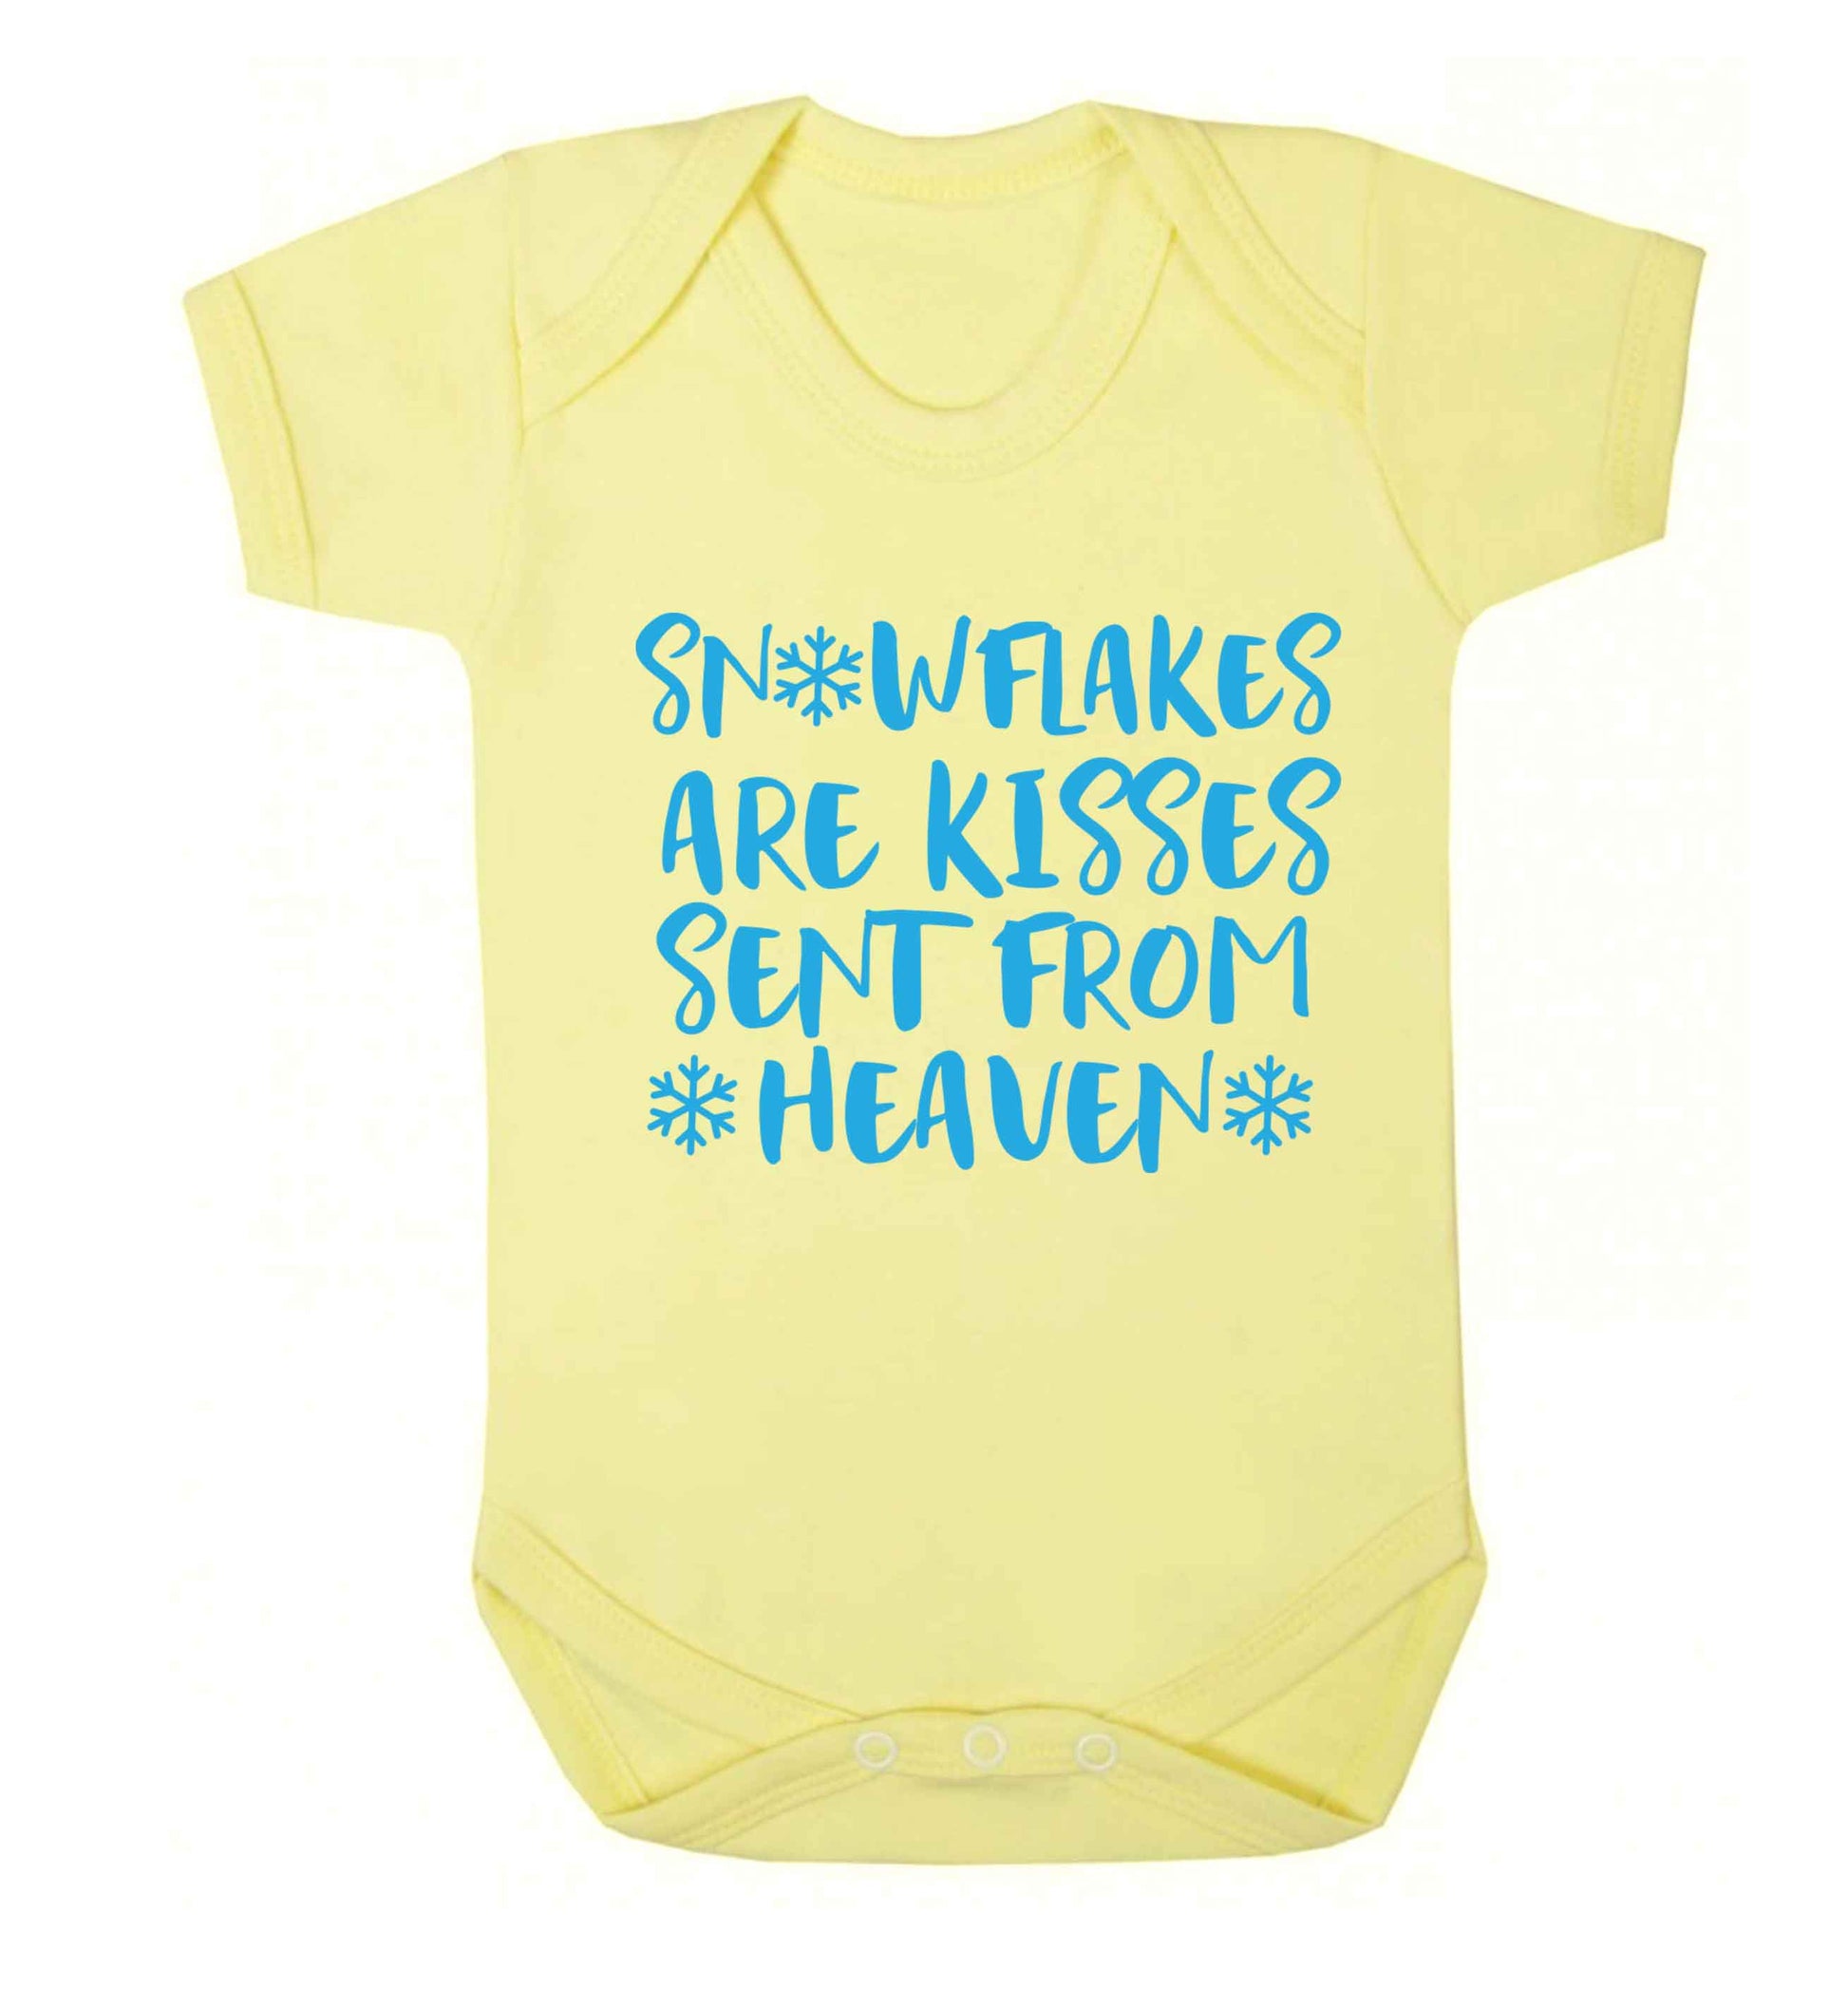 Snowflakes are kisses sent from heaven Baby Vest pale yellow 18-24 months